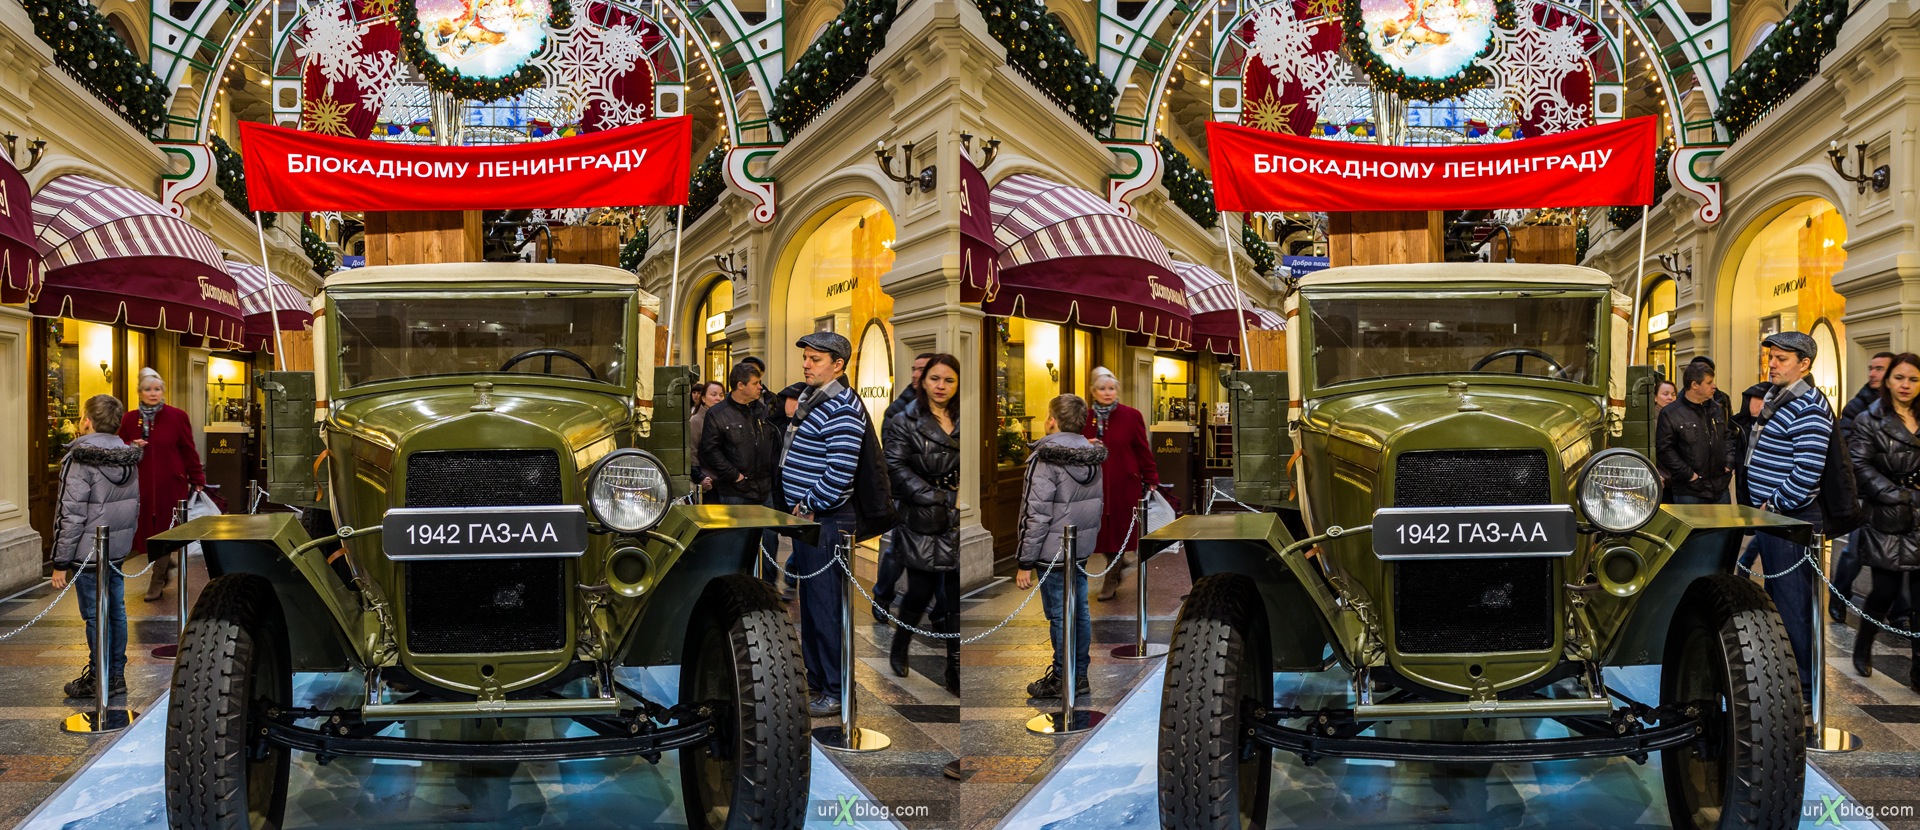 2013, Moscow, Russia, GAZ-AA, GUM, old, automobile, vehicle, exhibition, shop, mall, 3D, stereo pair, cross-eyed, crossview, cross view stereo pair, stereoscopic